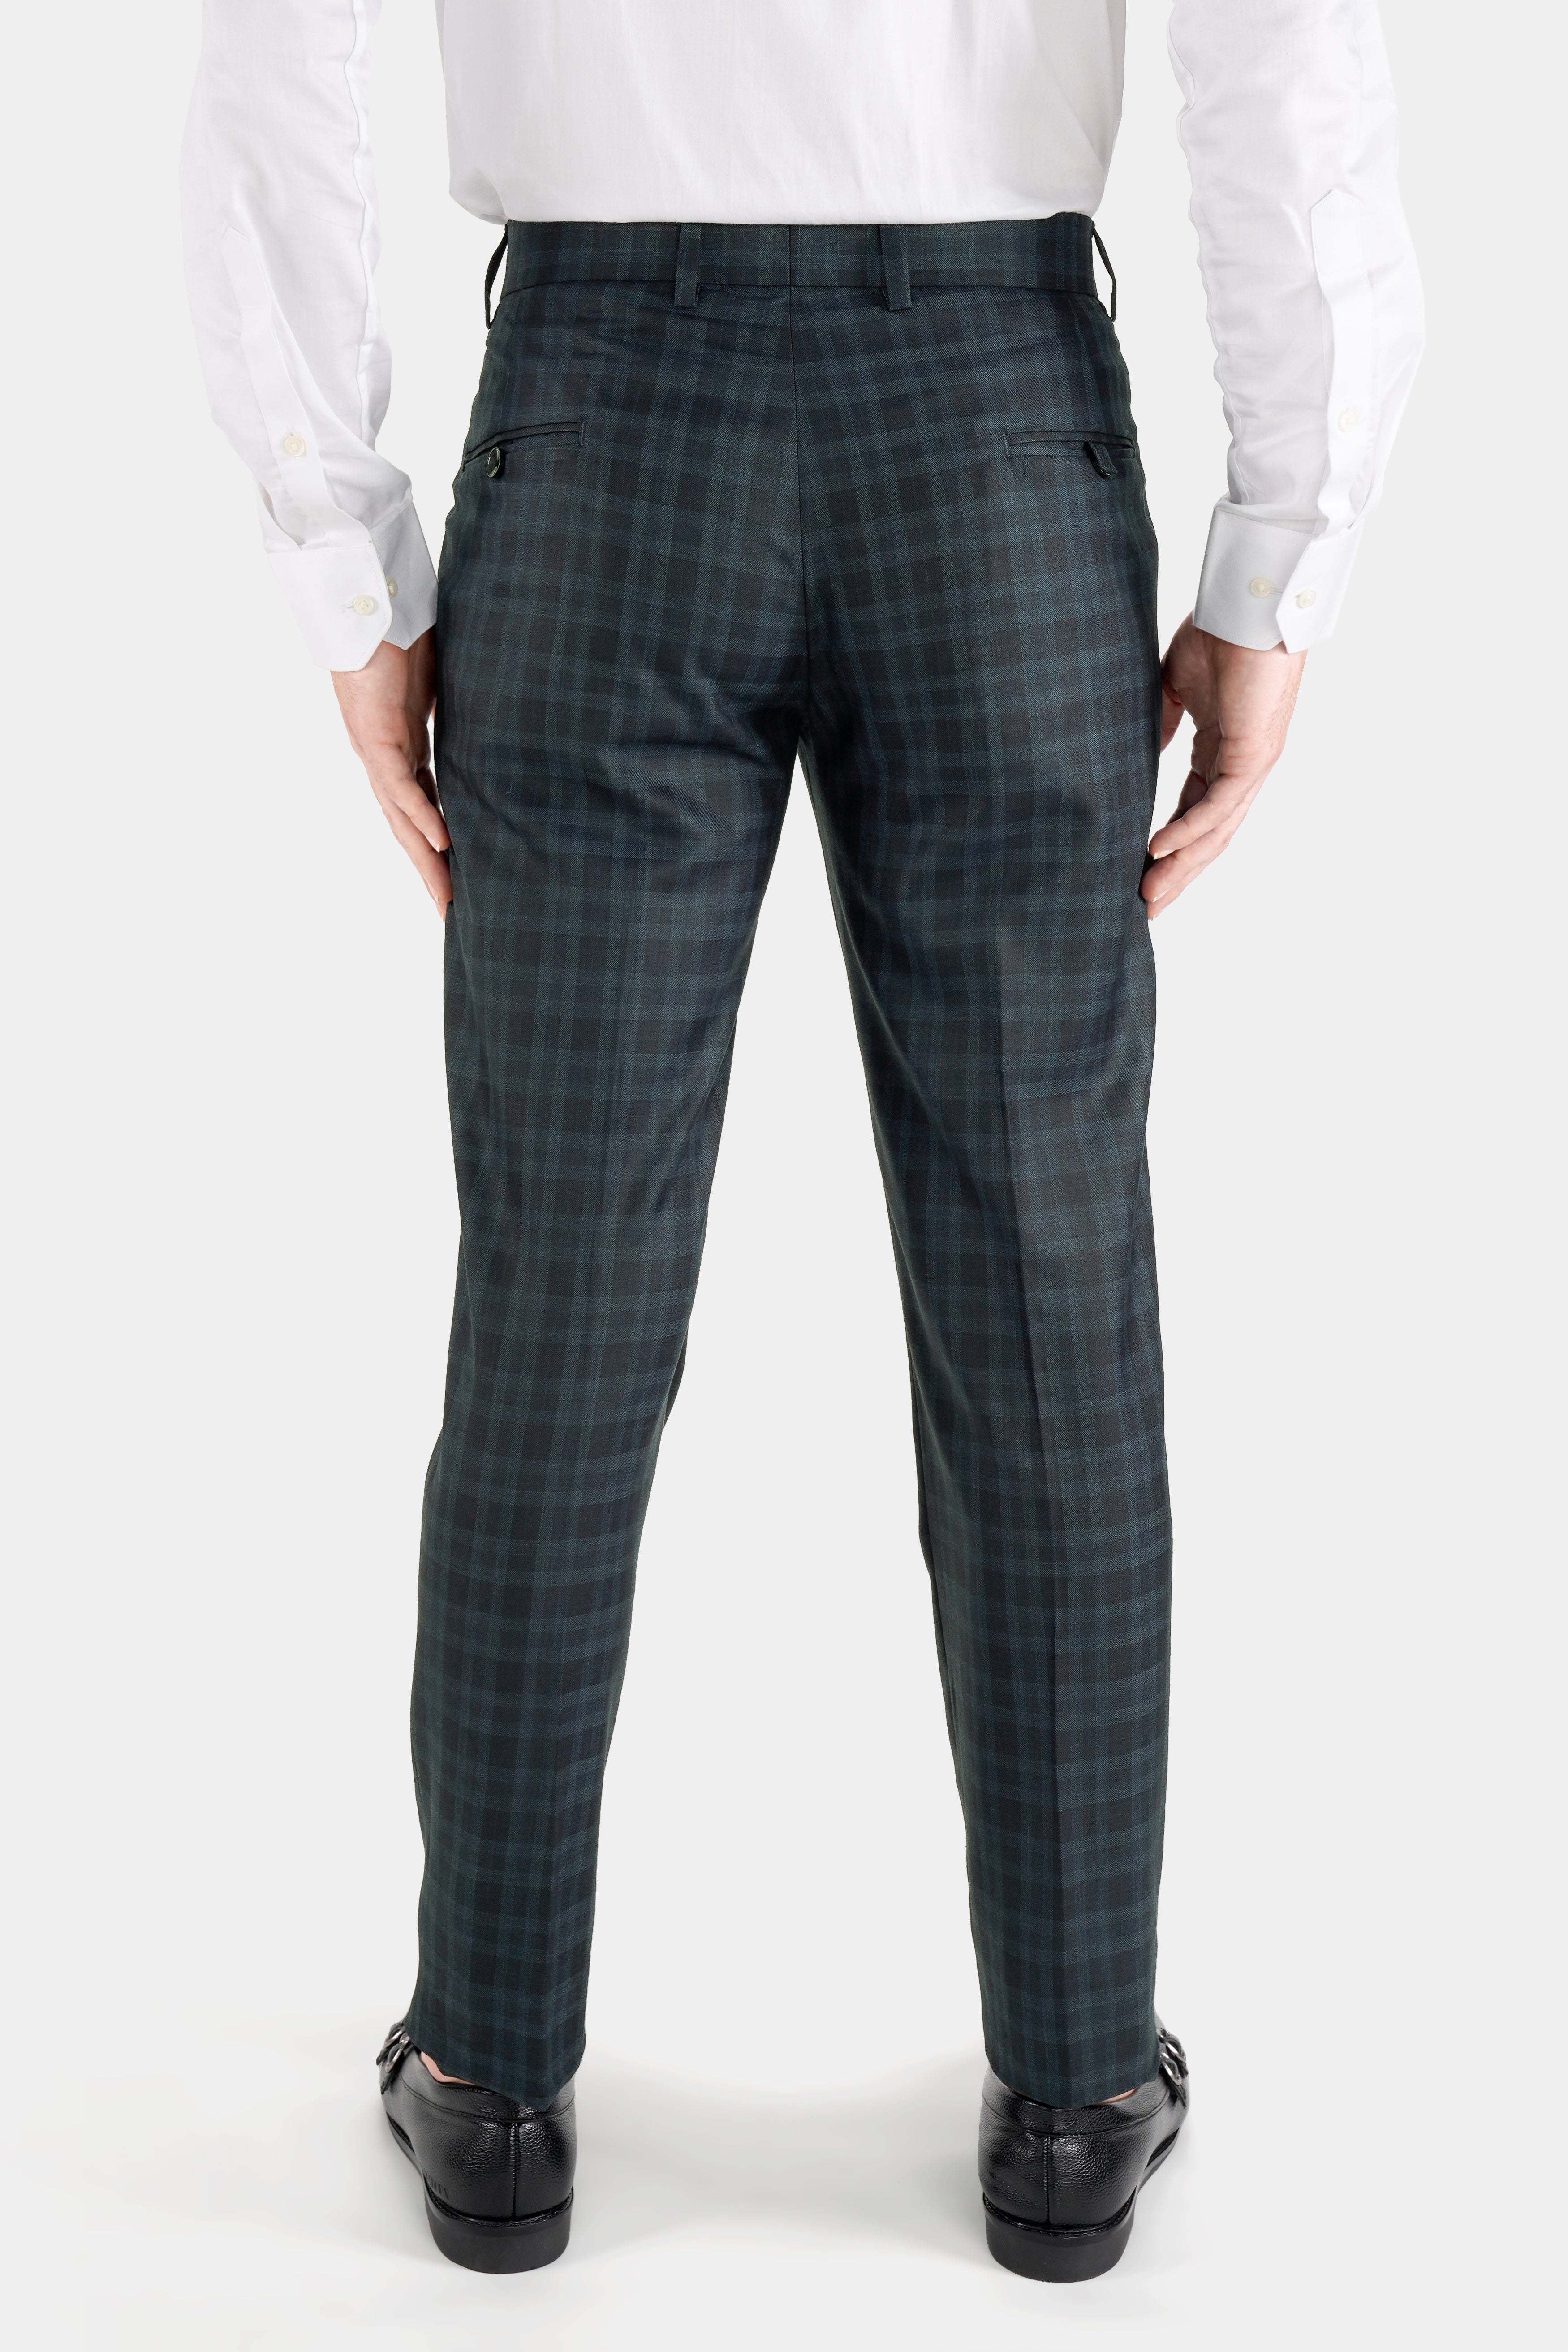 Baltic Sea Blue with Tuna Navy Blue Checkered Wool Rich Pant T2738-28, T2738-30, T2738-32, T2738-34, T2738-36, T2738-38, T2738-40, T2738-42, T2738-44